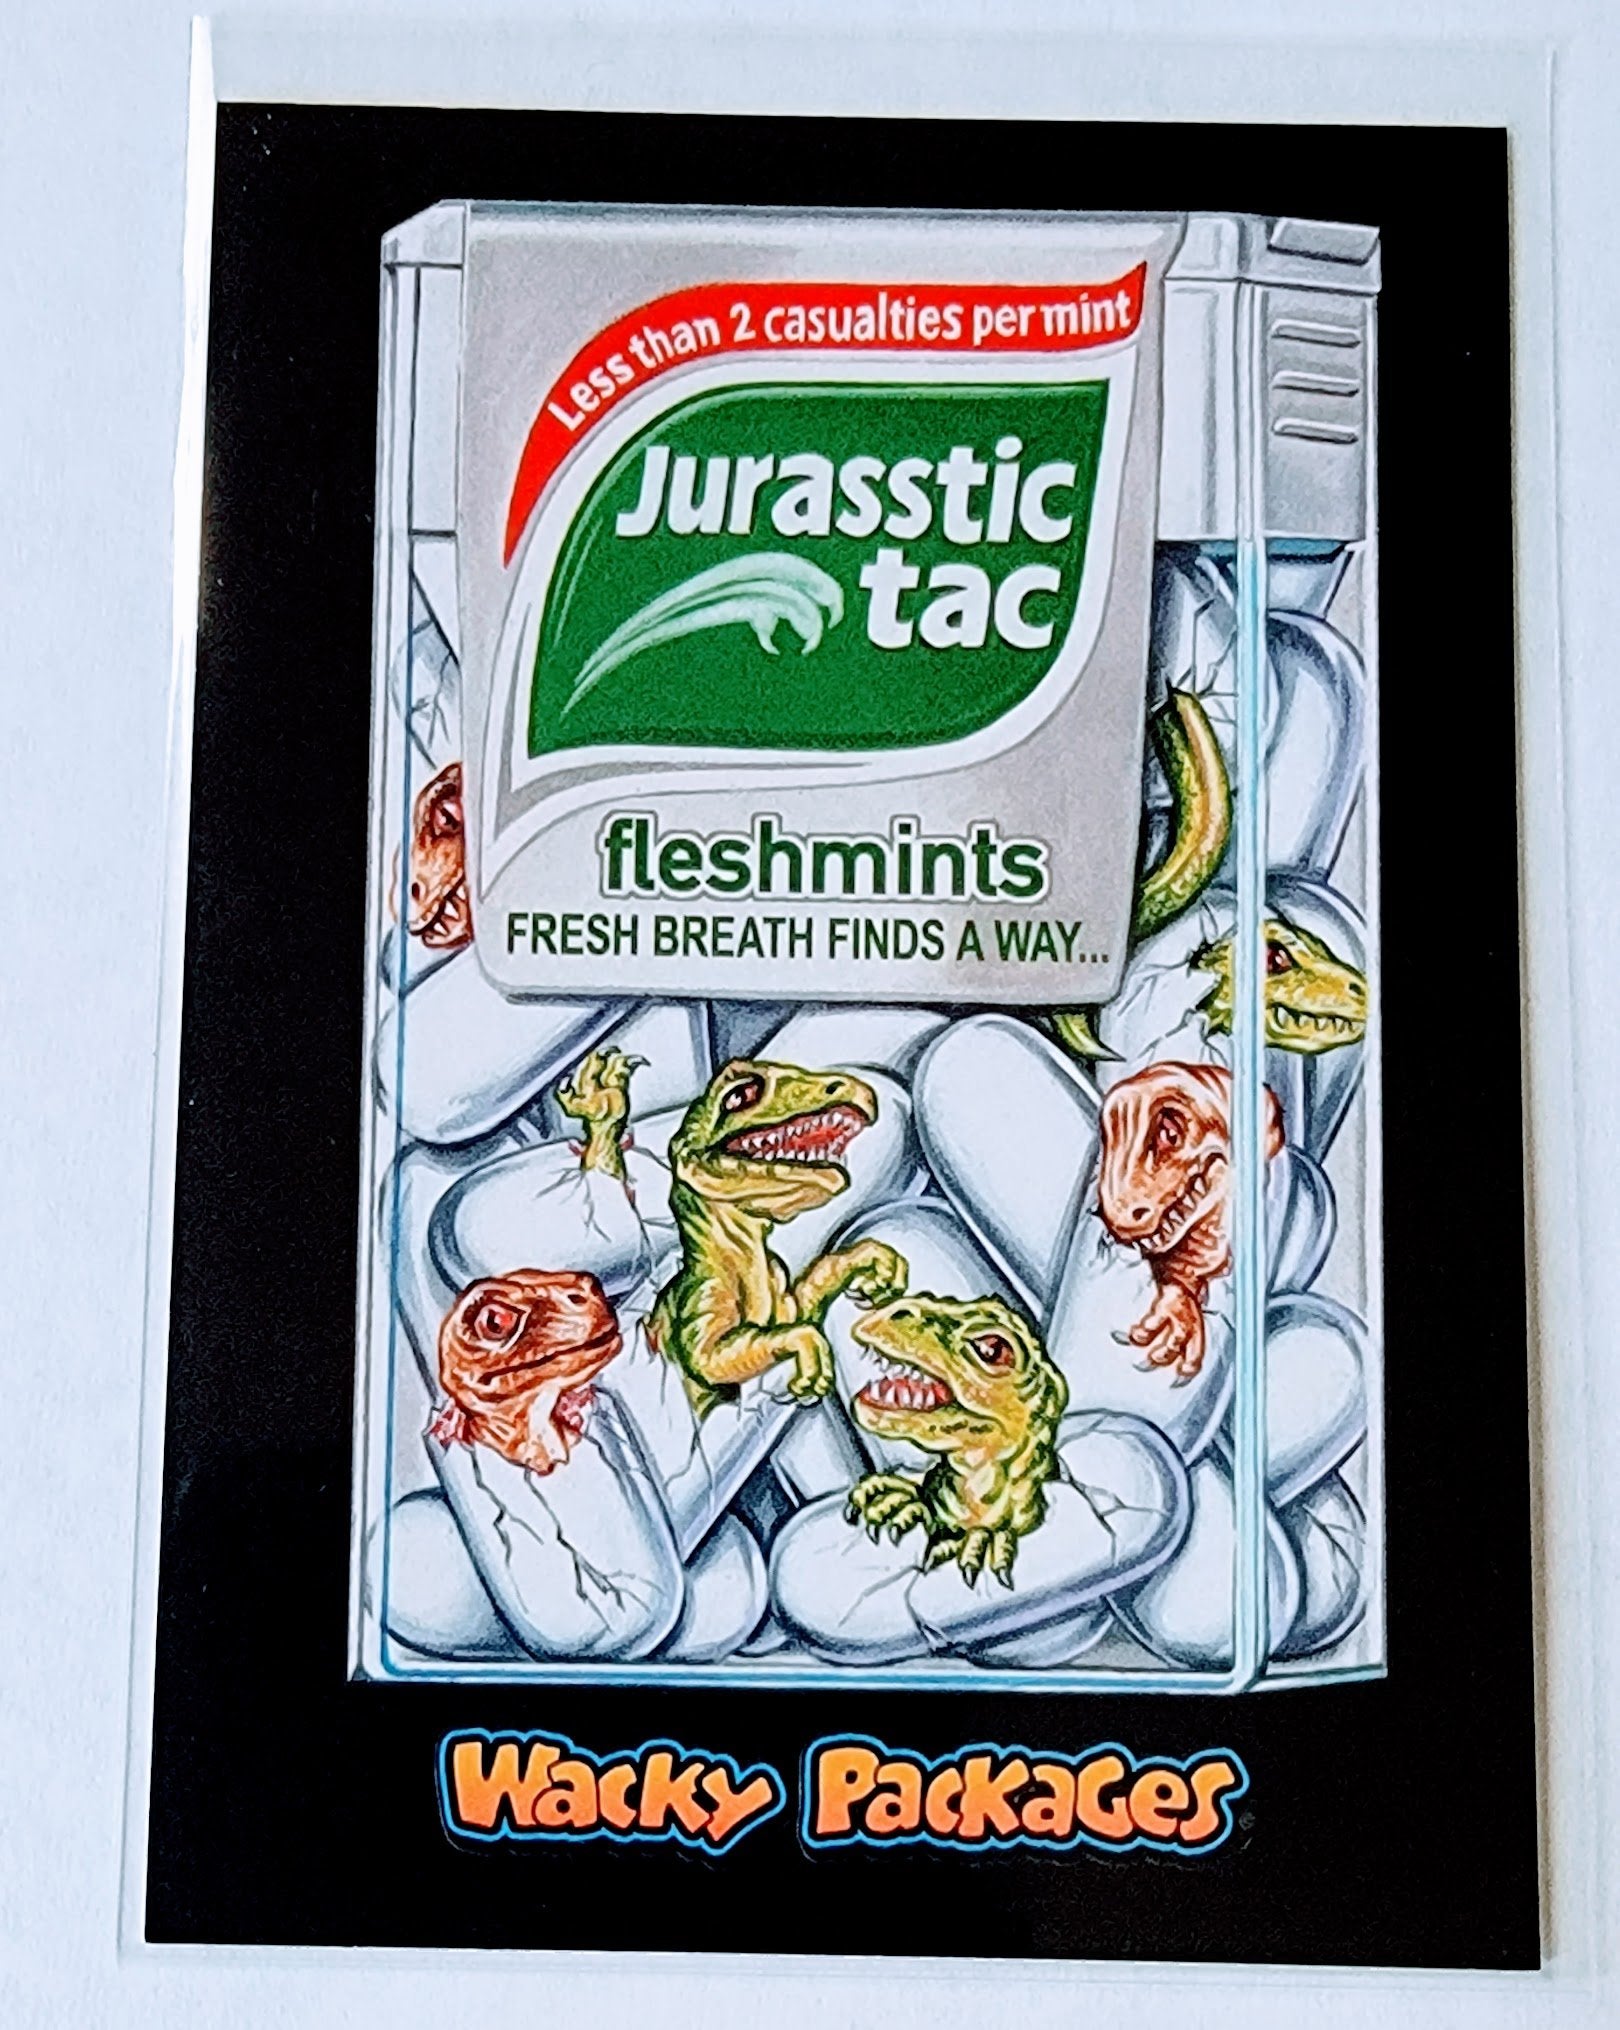 2017 Wacky Packages 50th Anniversary Jurrasstic Tac Fleshmints Sticker Trading Card MCSC1 simple Xclusive Collectibles   